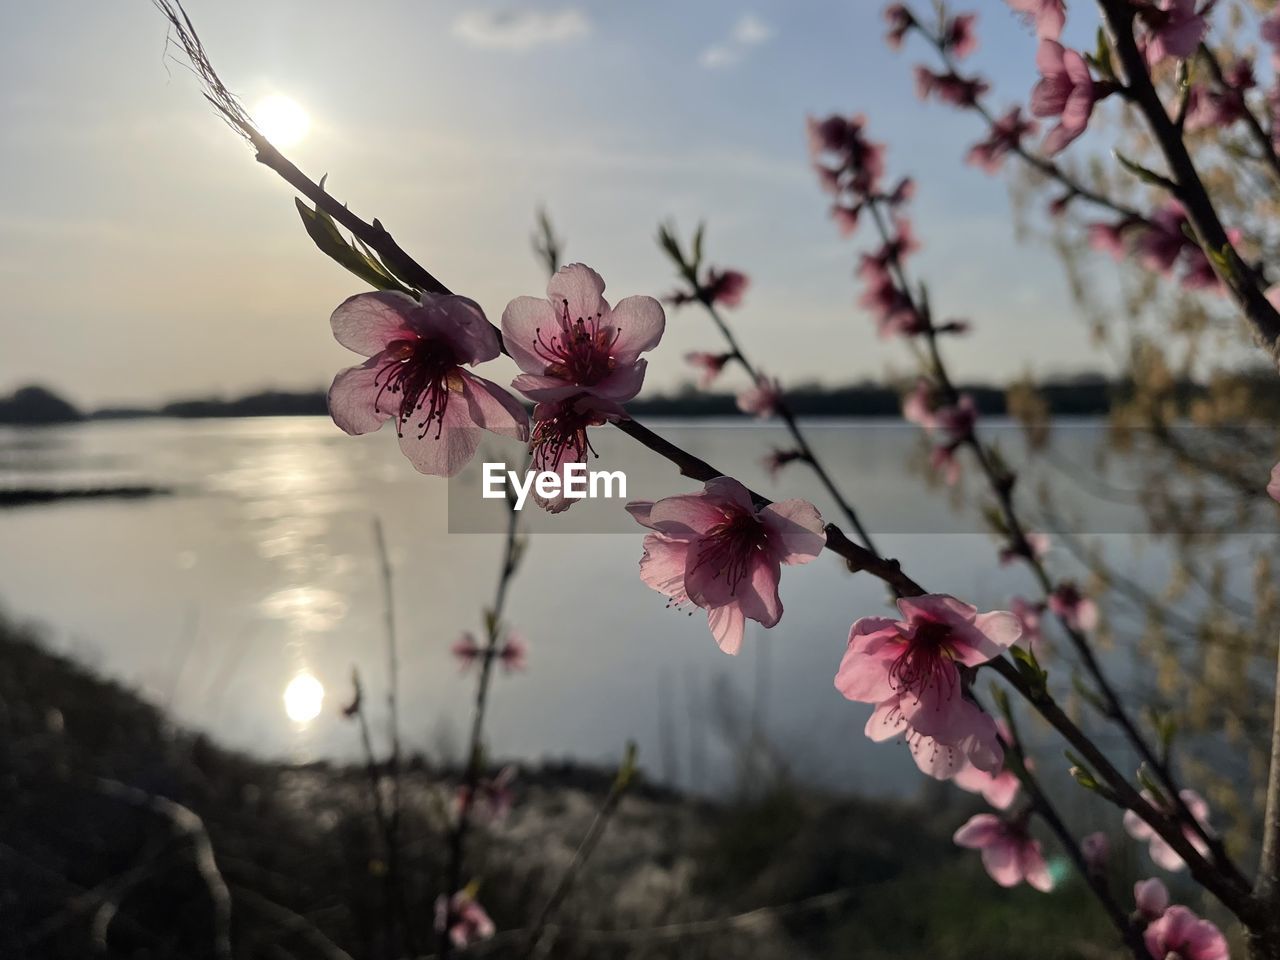 plant, flower, flowering plant, beauty in nature, pink, blossom, freshness, nature, springtime, tree, fragility, sky, cherry blossom, branch, growth, water, focus on foreground, spring, no people, sunset, close-up, tranquility, outdoors, inflorescence, food and drink, petal, flower head, fruit, food, botany, landscape, scenics - nature, leaf, cherry tree, sun, cloud, environment, macro photography, dusk, sunlight, tranquil scene, twig, selective focus